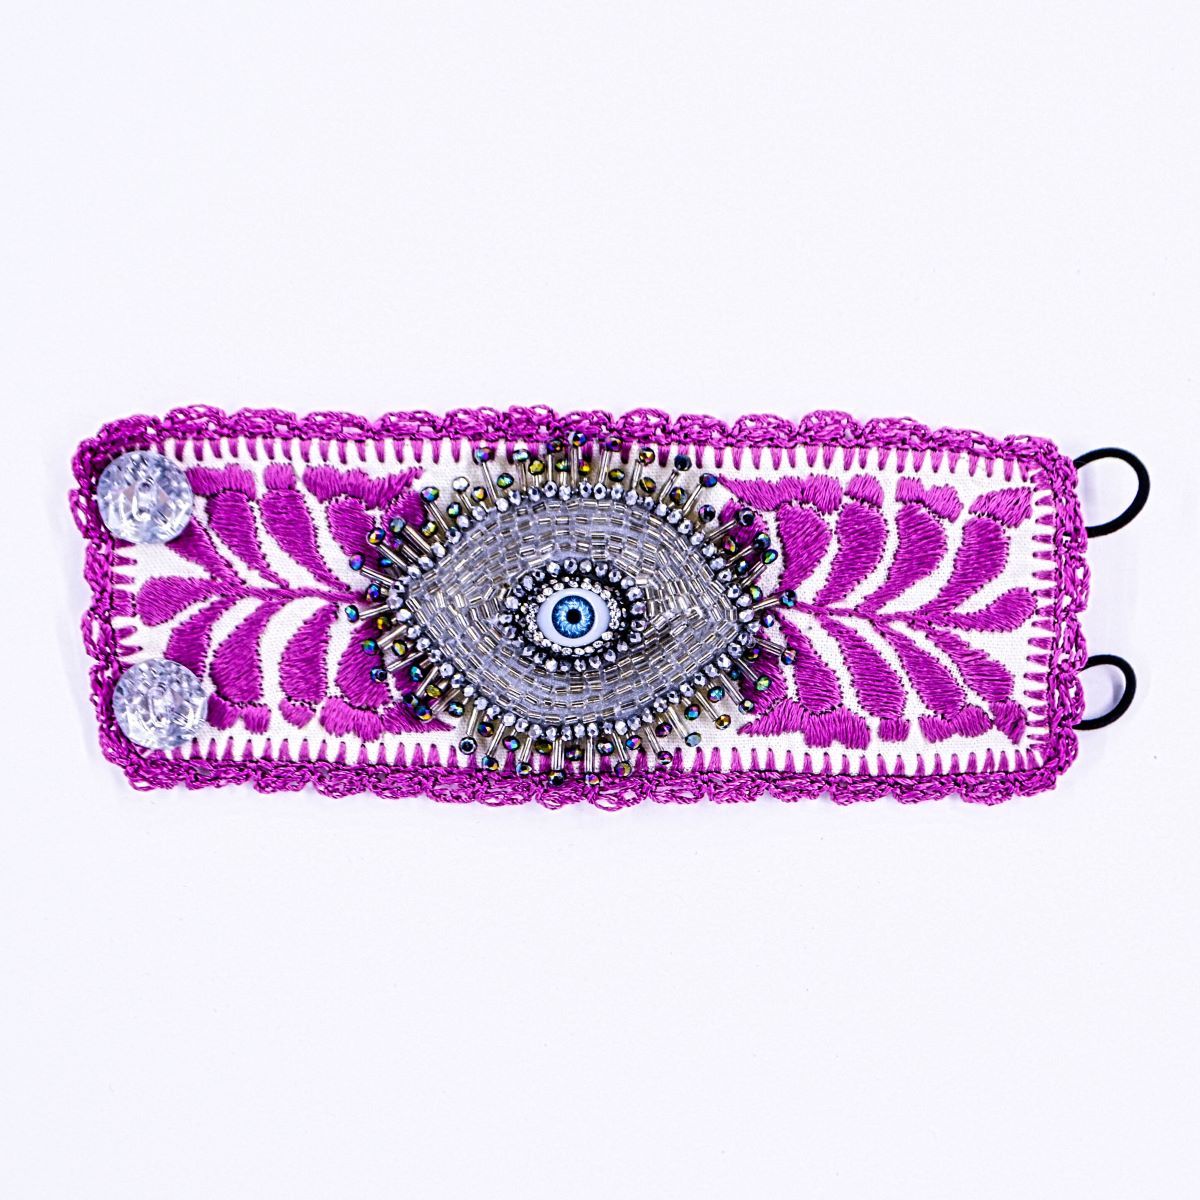 BLUE EVIL EYE WITH PINK EMBROIDERY - BRACELET (WIDE - 2.5")